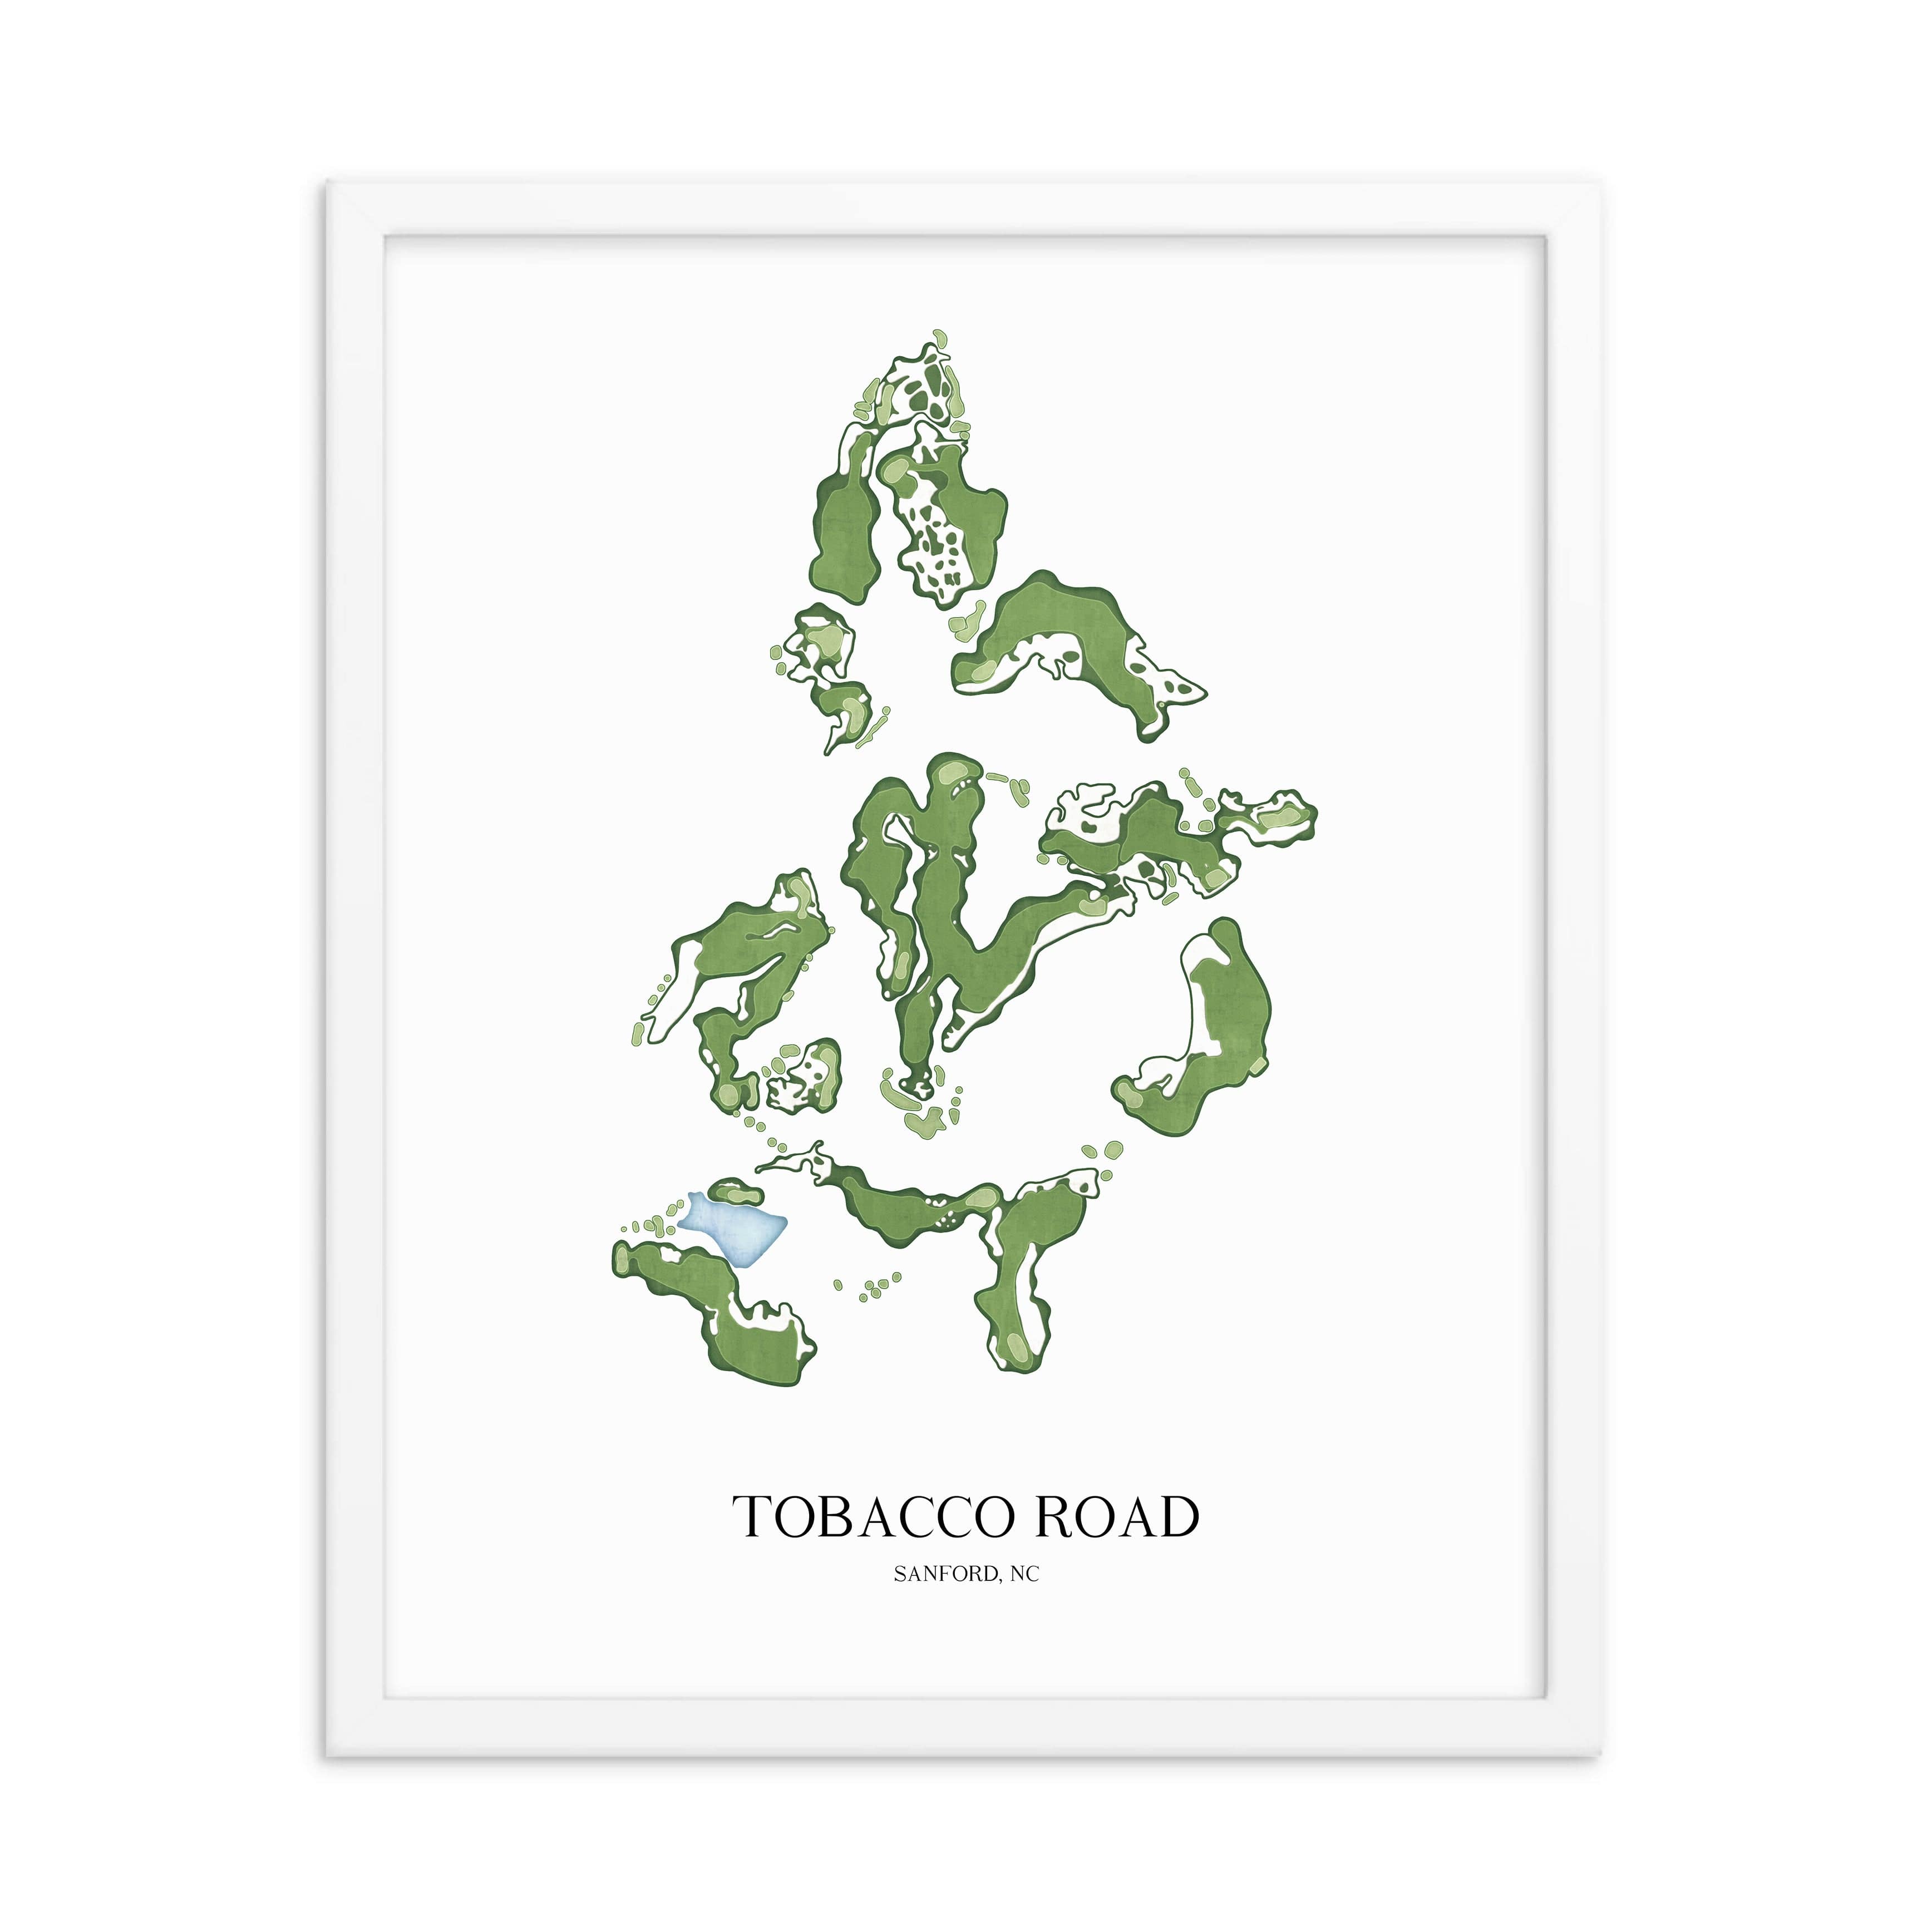 The 19th Hole Golf Shop - Golf Course Prints -  8" x 10" / White Tobacco Road Golf Course Map